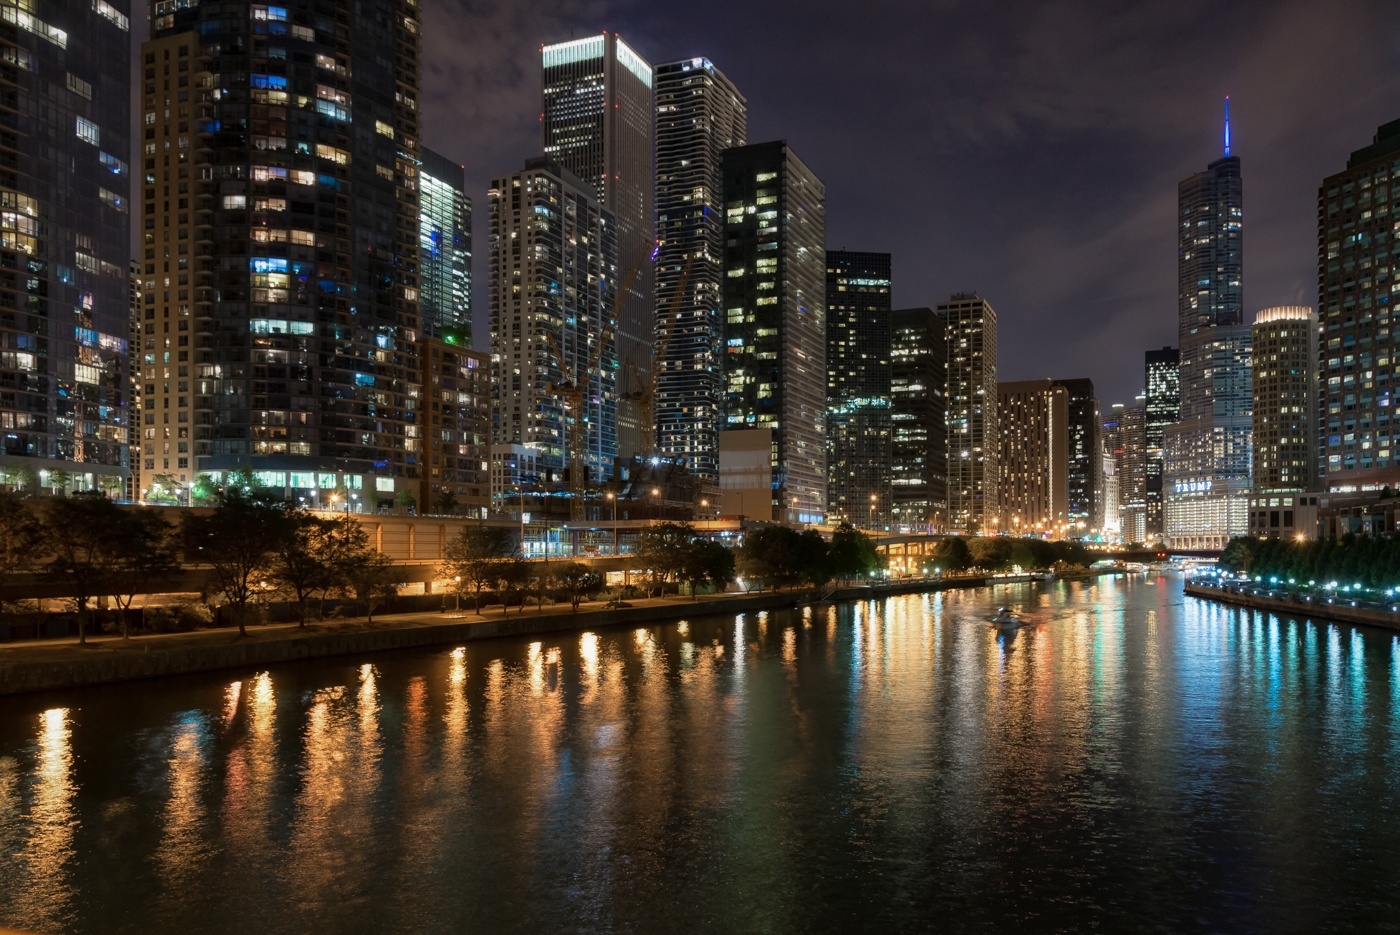 Night View of the Chicago River by Bill Payne